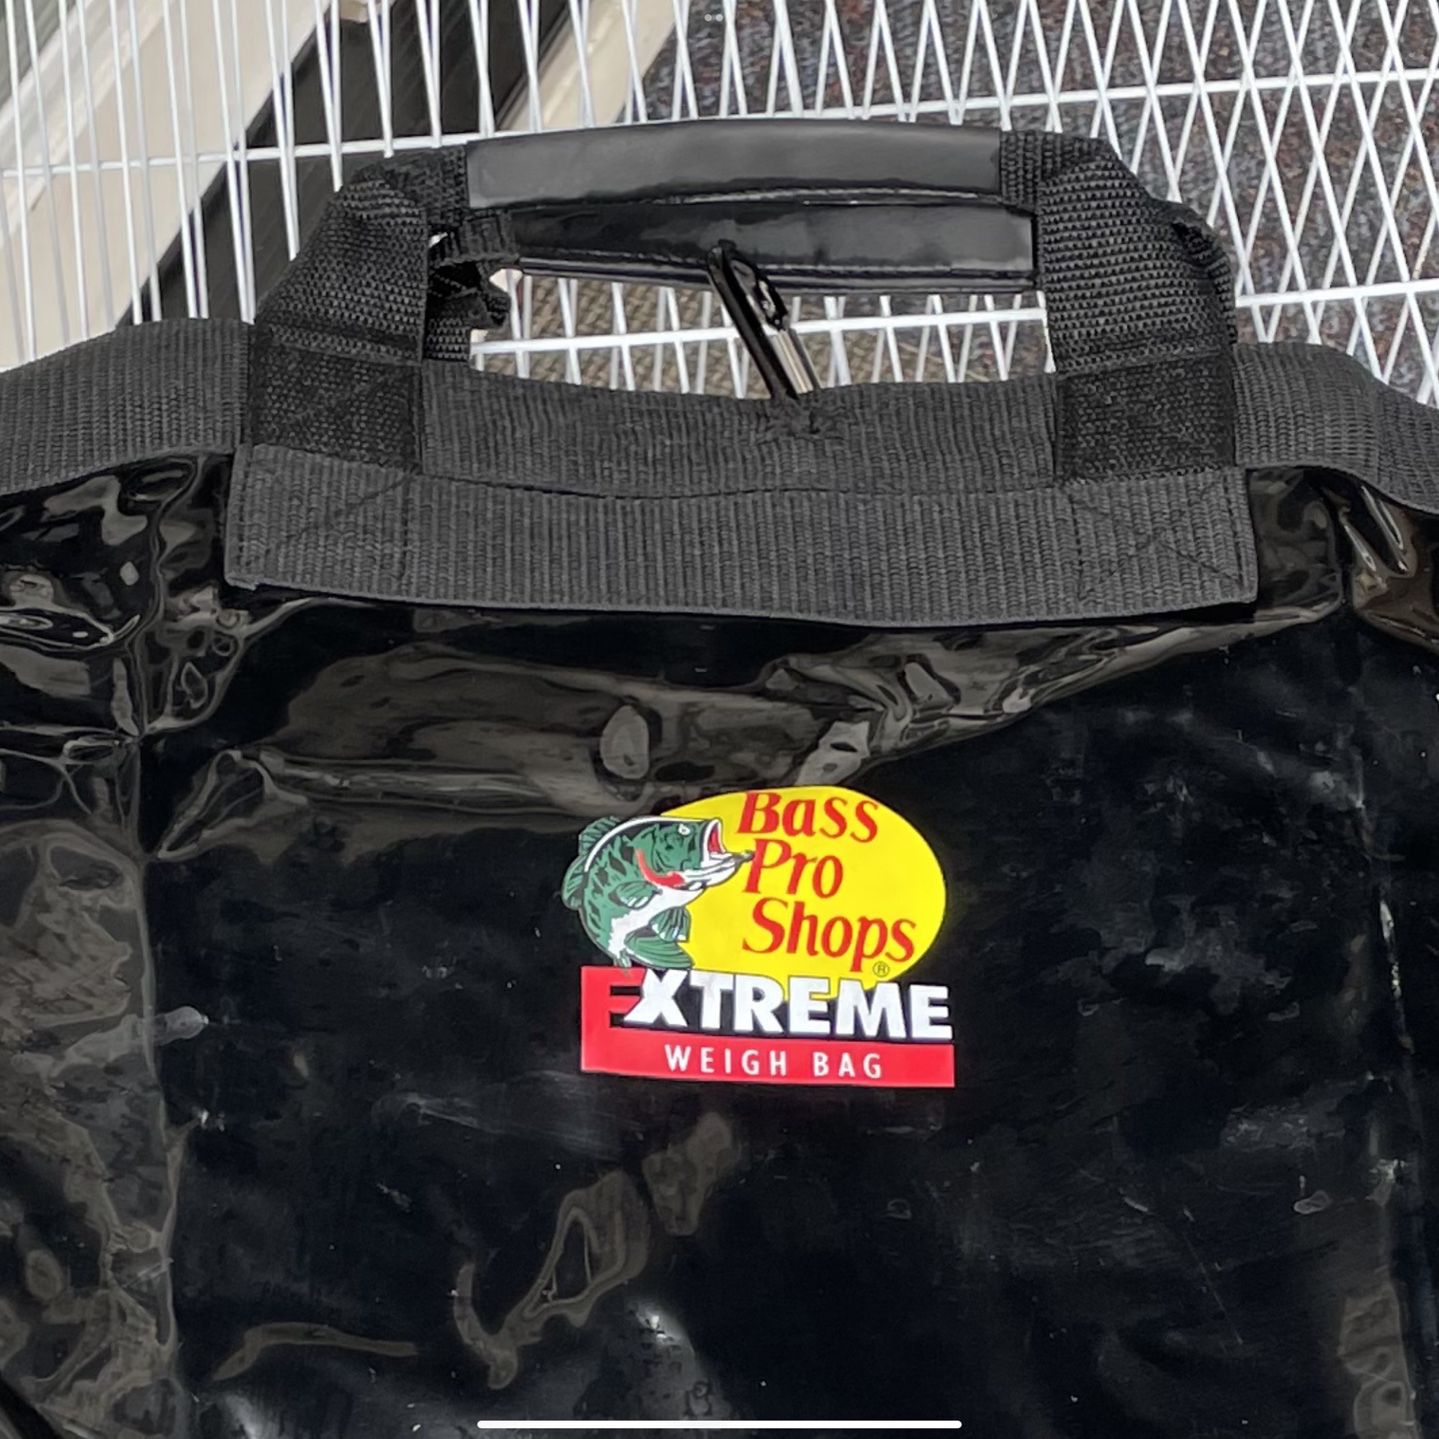 Bass Pro Shop Tournament Weigh Bag for Sale in Modesto, CA - OfferUp